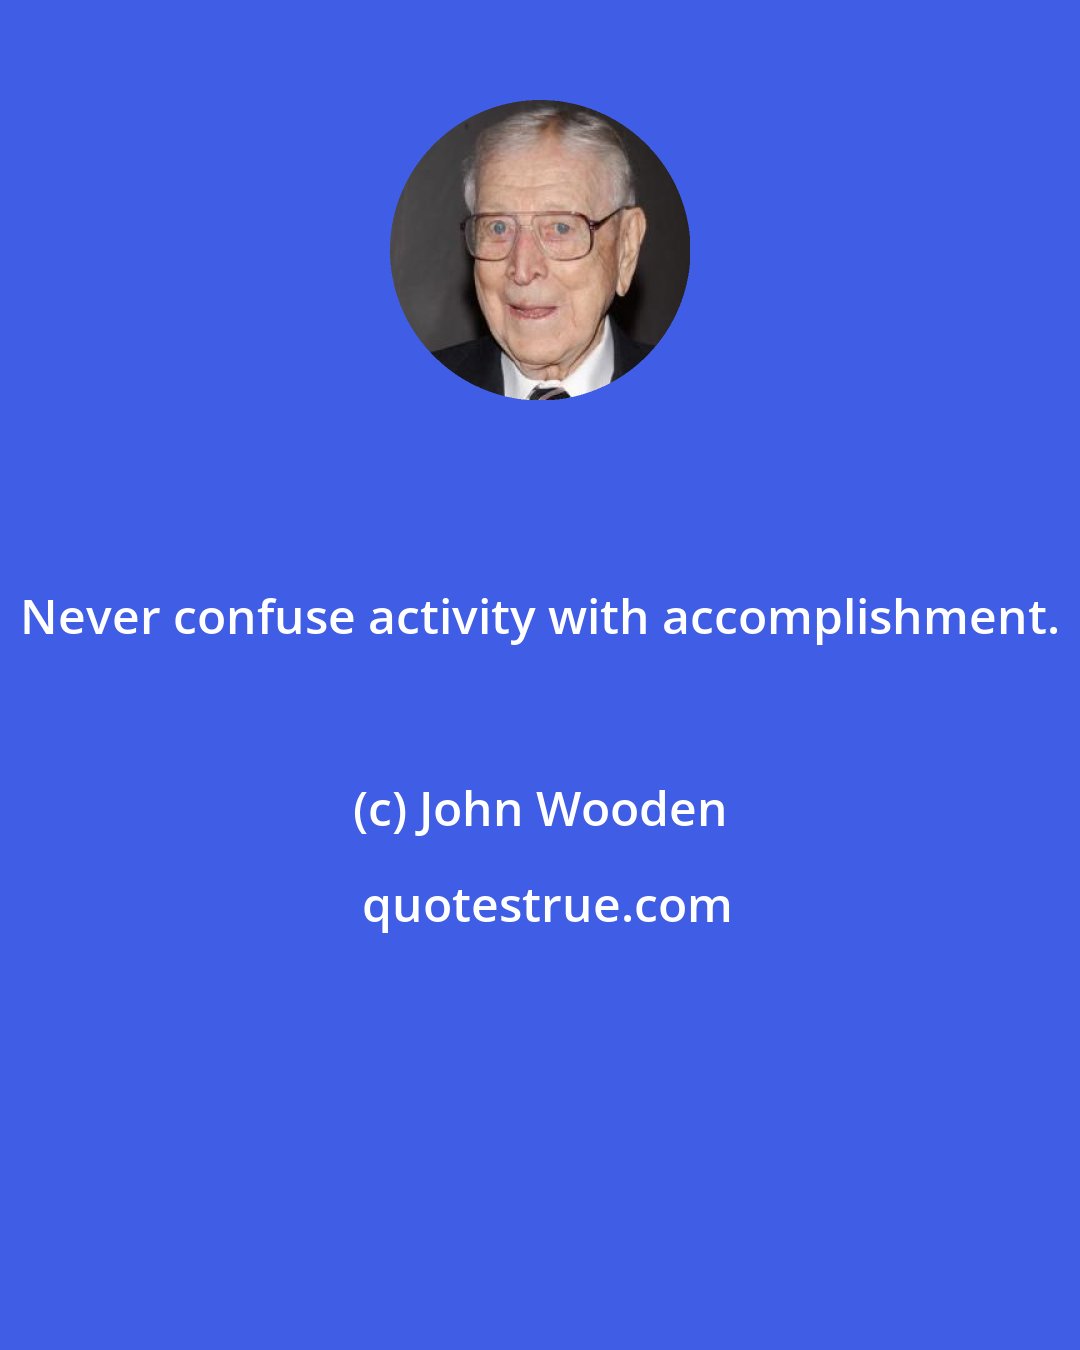 John Wooden: Never confuse activity with accomplishment.